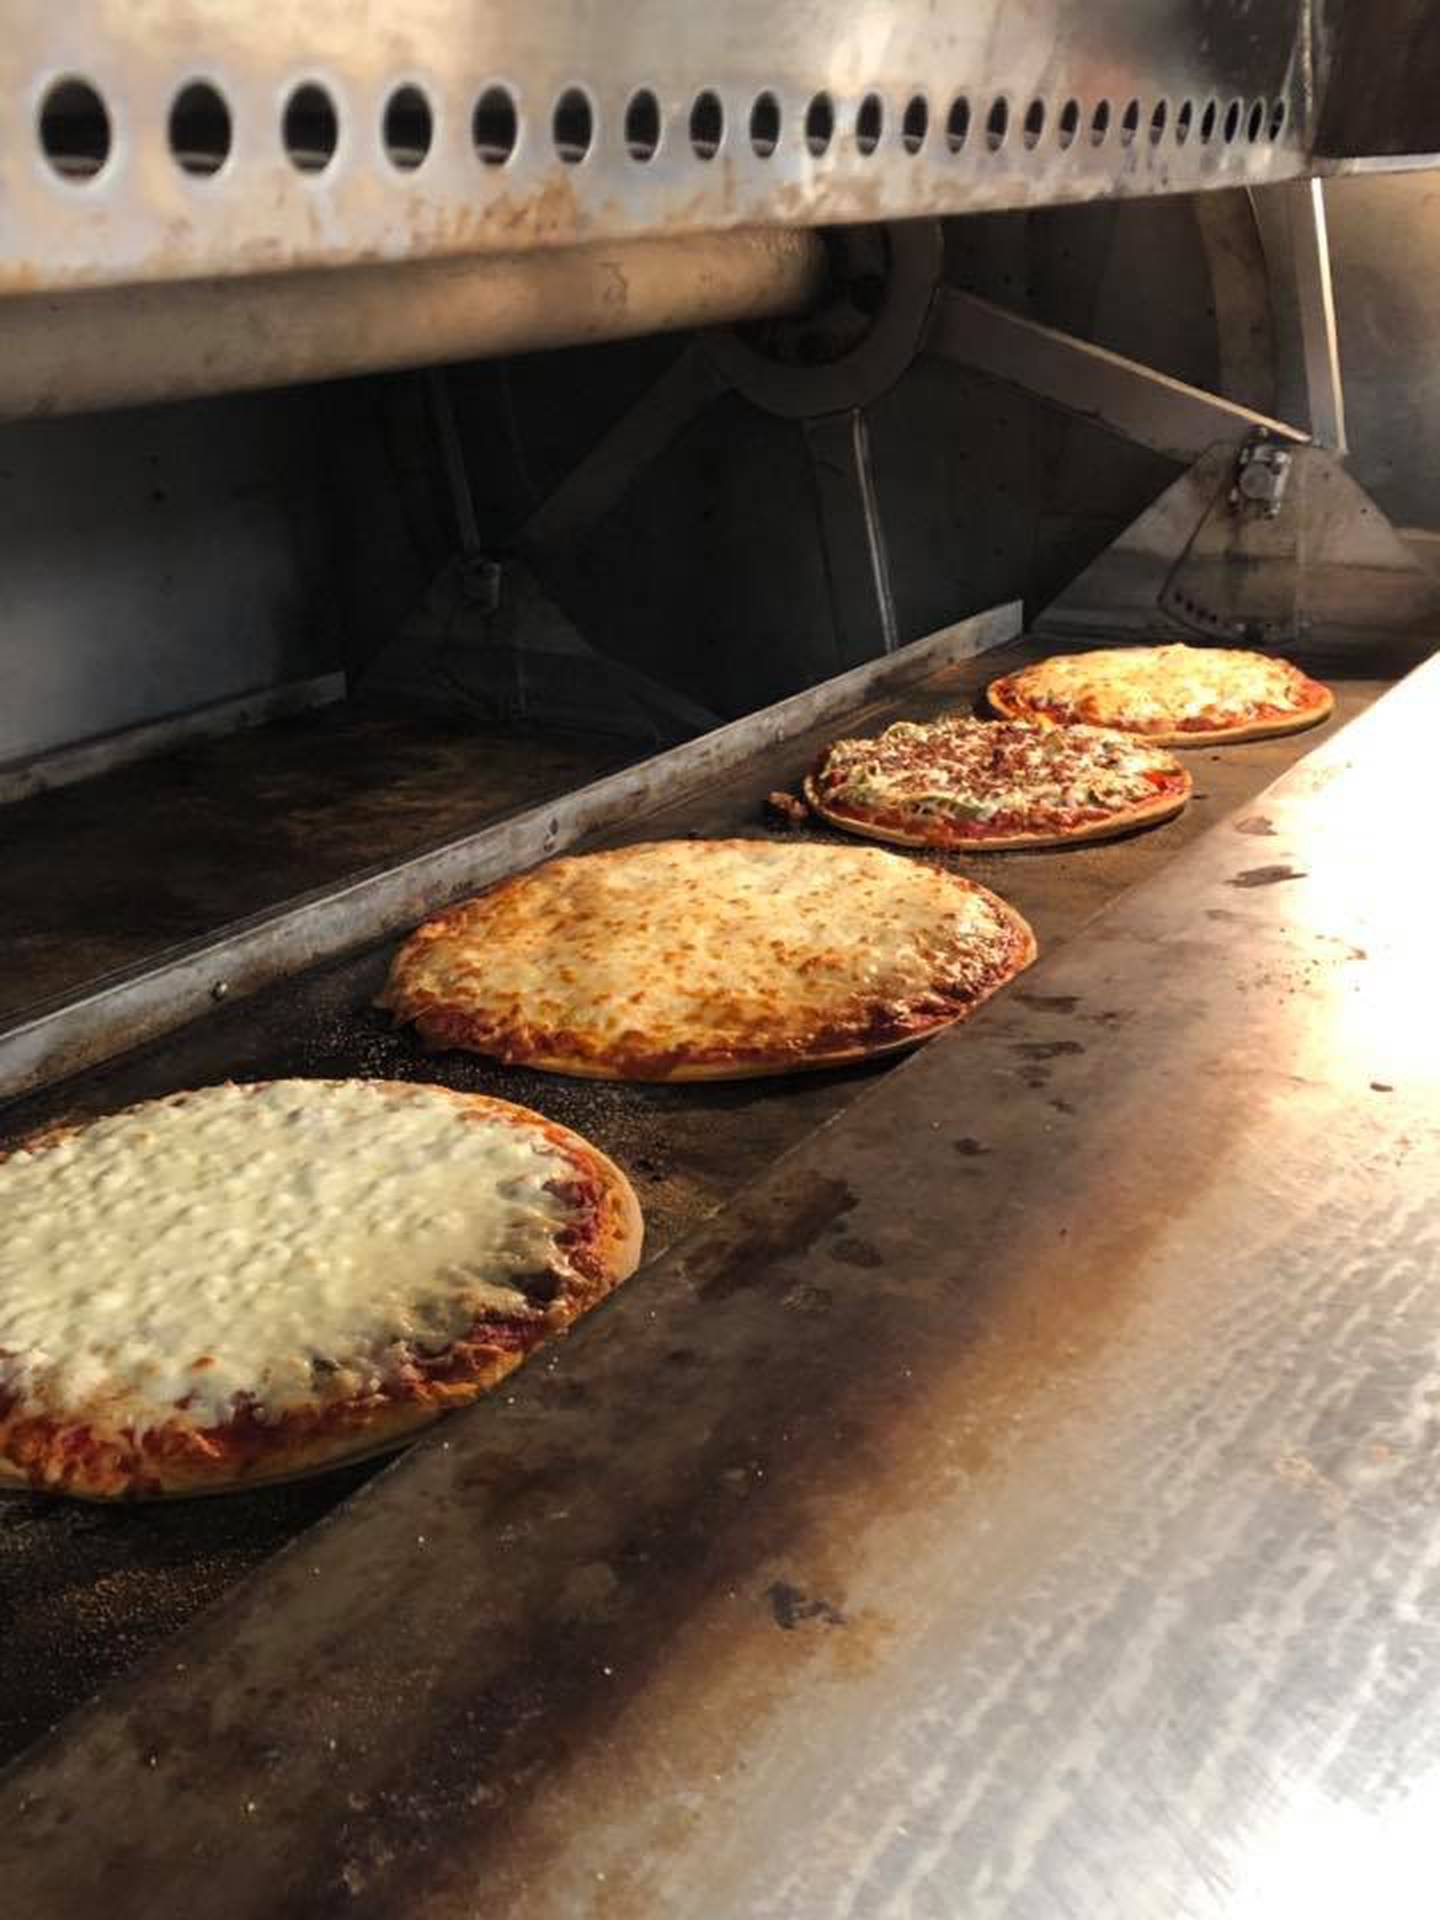 Mama Maria's Pizza in Bensenville was voted in the top 10 pizza places in DuPage County by readers in 2021. (Photo from Mama Maria's Pizza Facebook page)